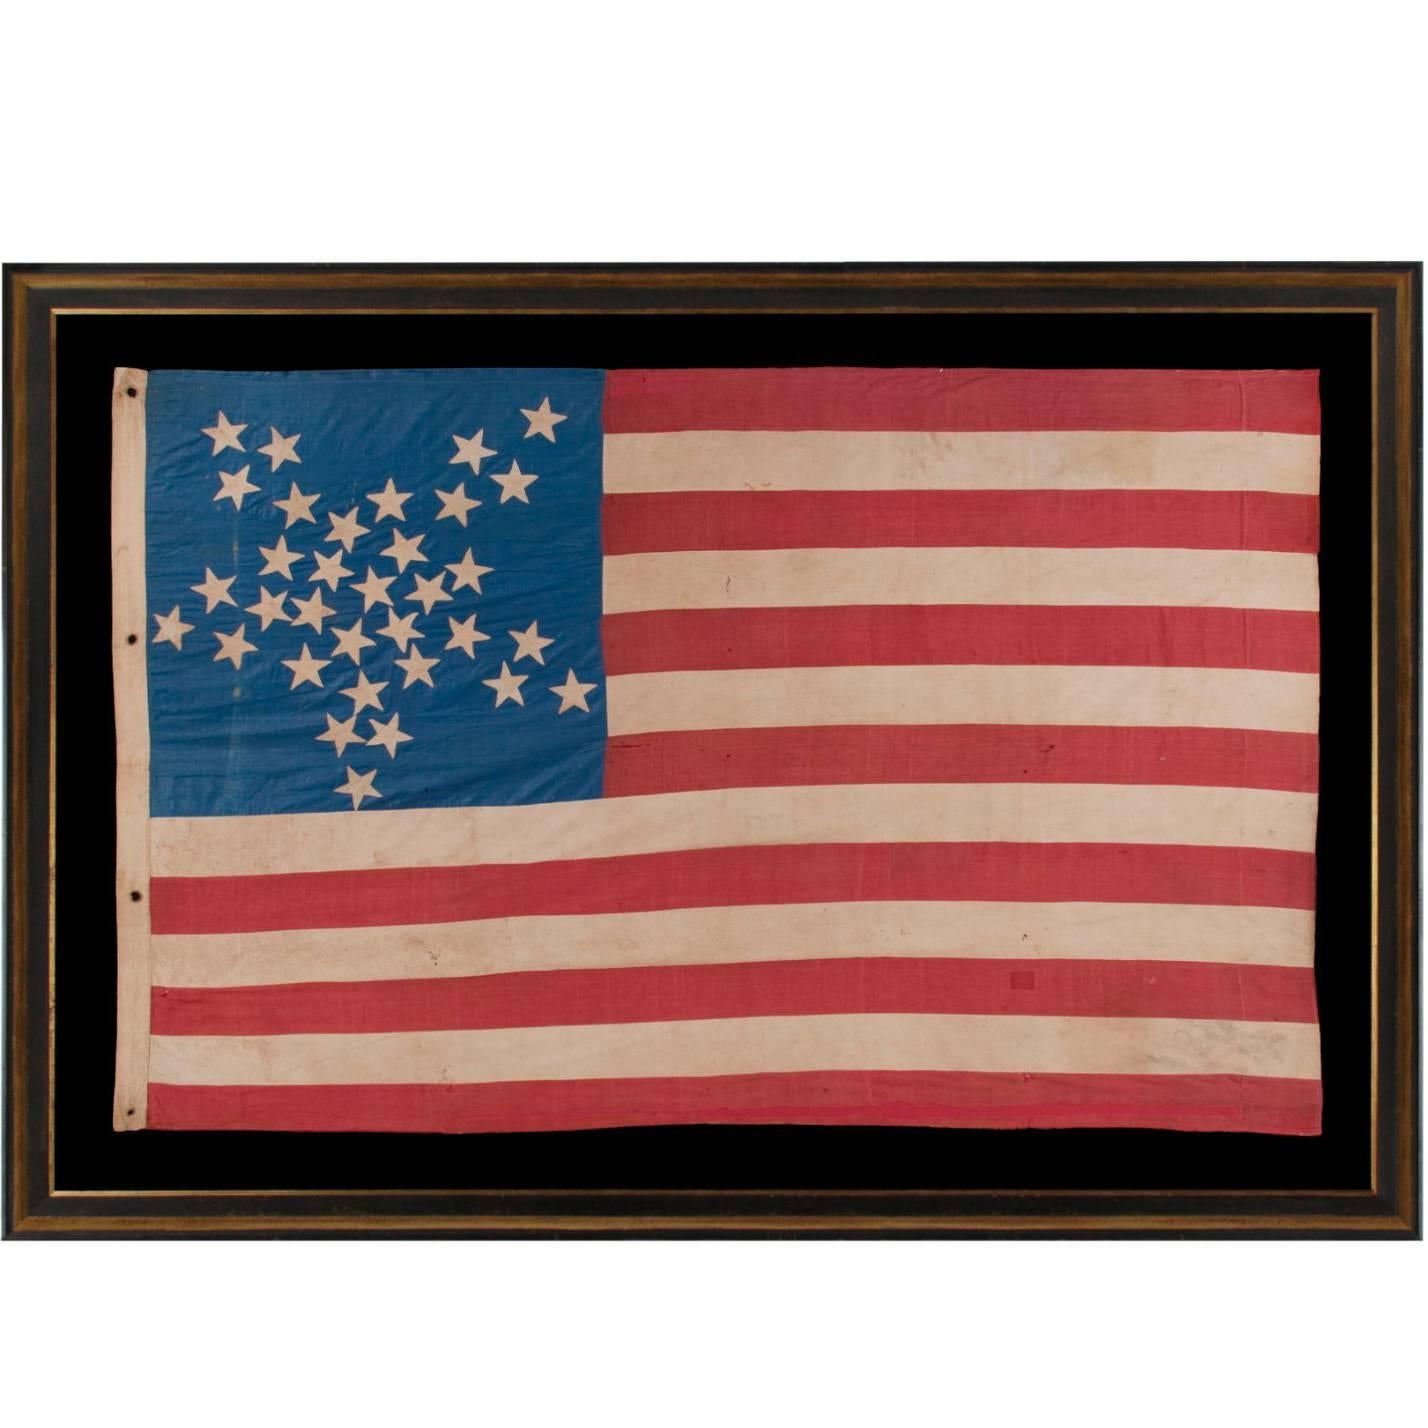 33 Stars in a "Great Star" or "Great Luminary" Patter on a Homemade Flag